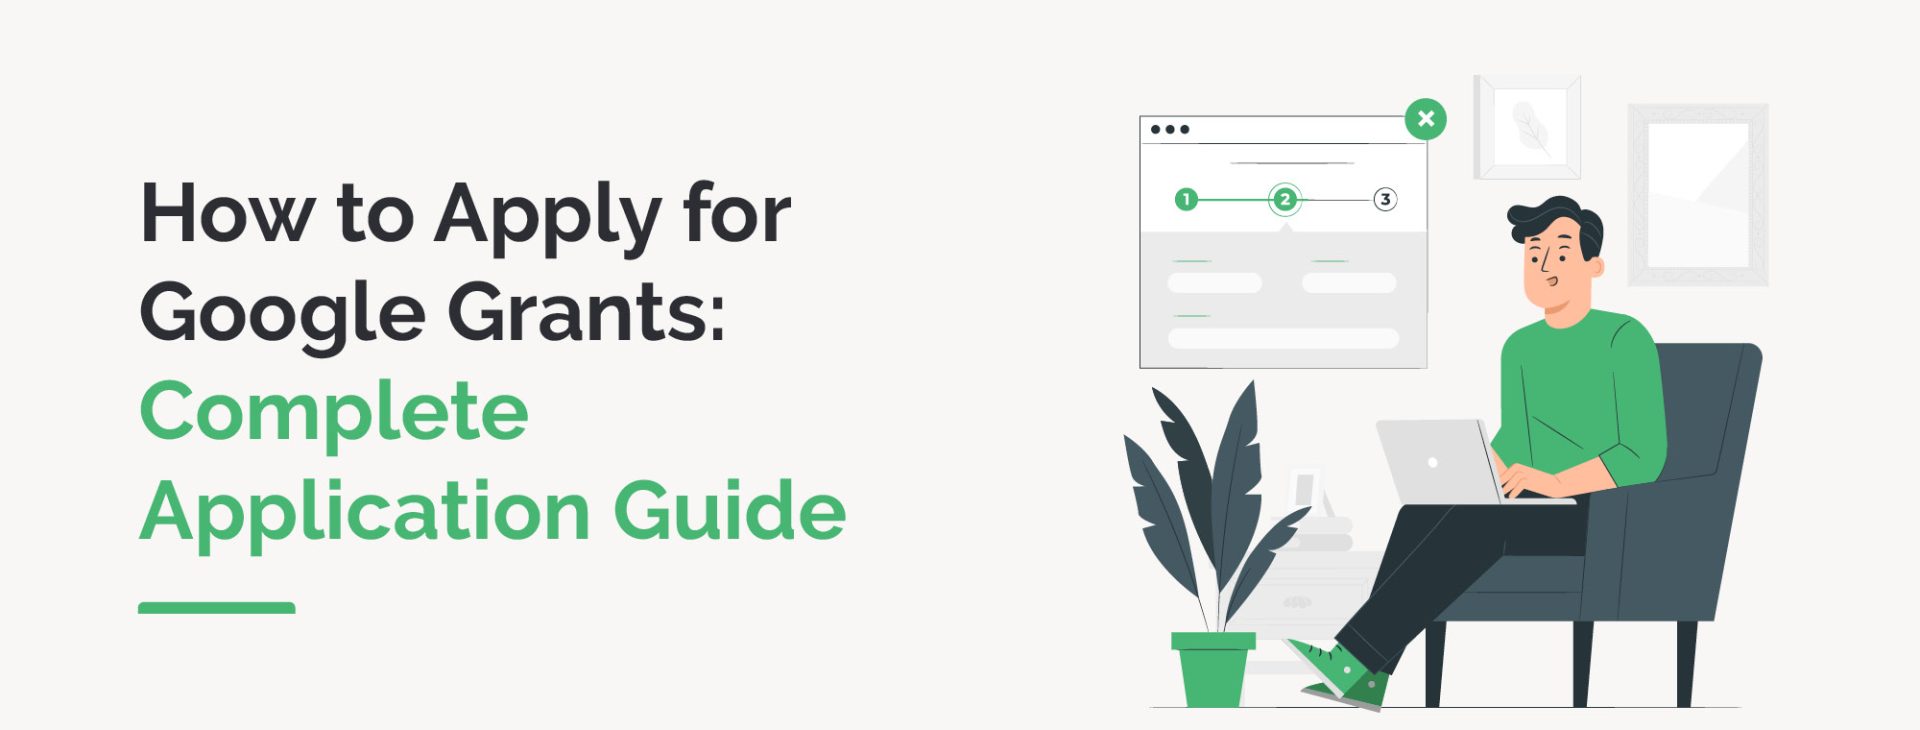 Learn everything you need to know about how to apply for Google Grants in this guide.